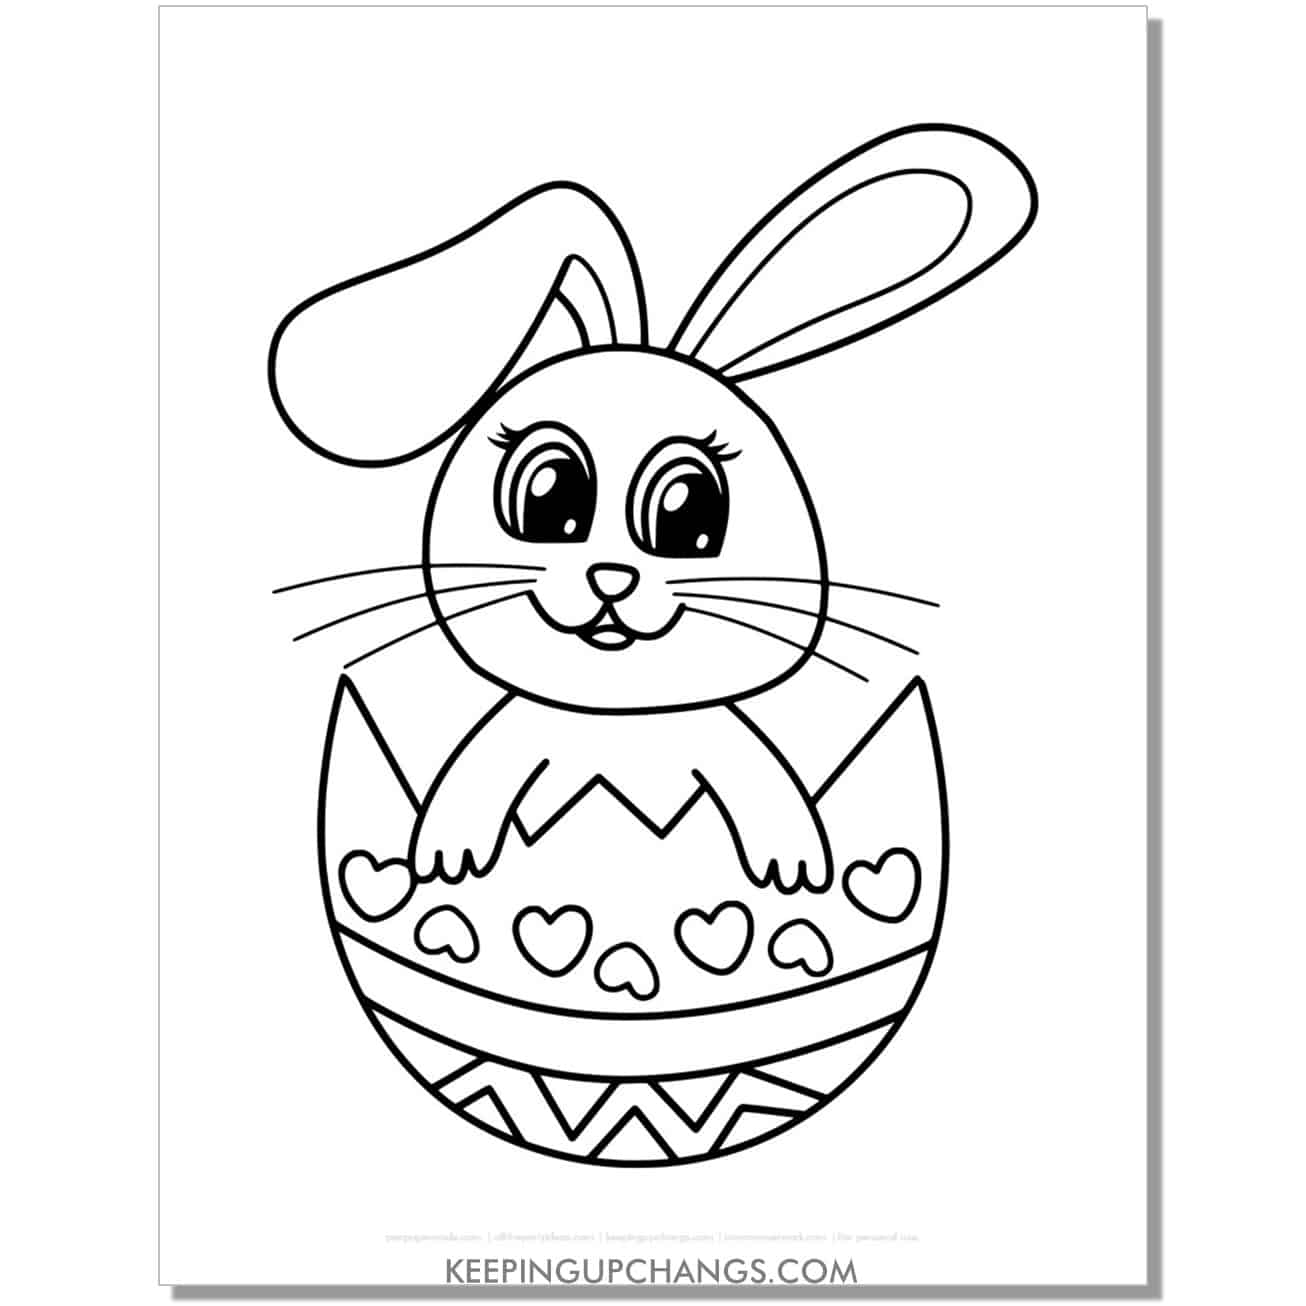 kawaii easter bunny in egg coloring page, sheet.